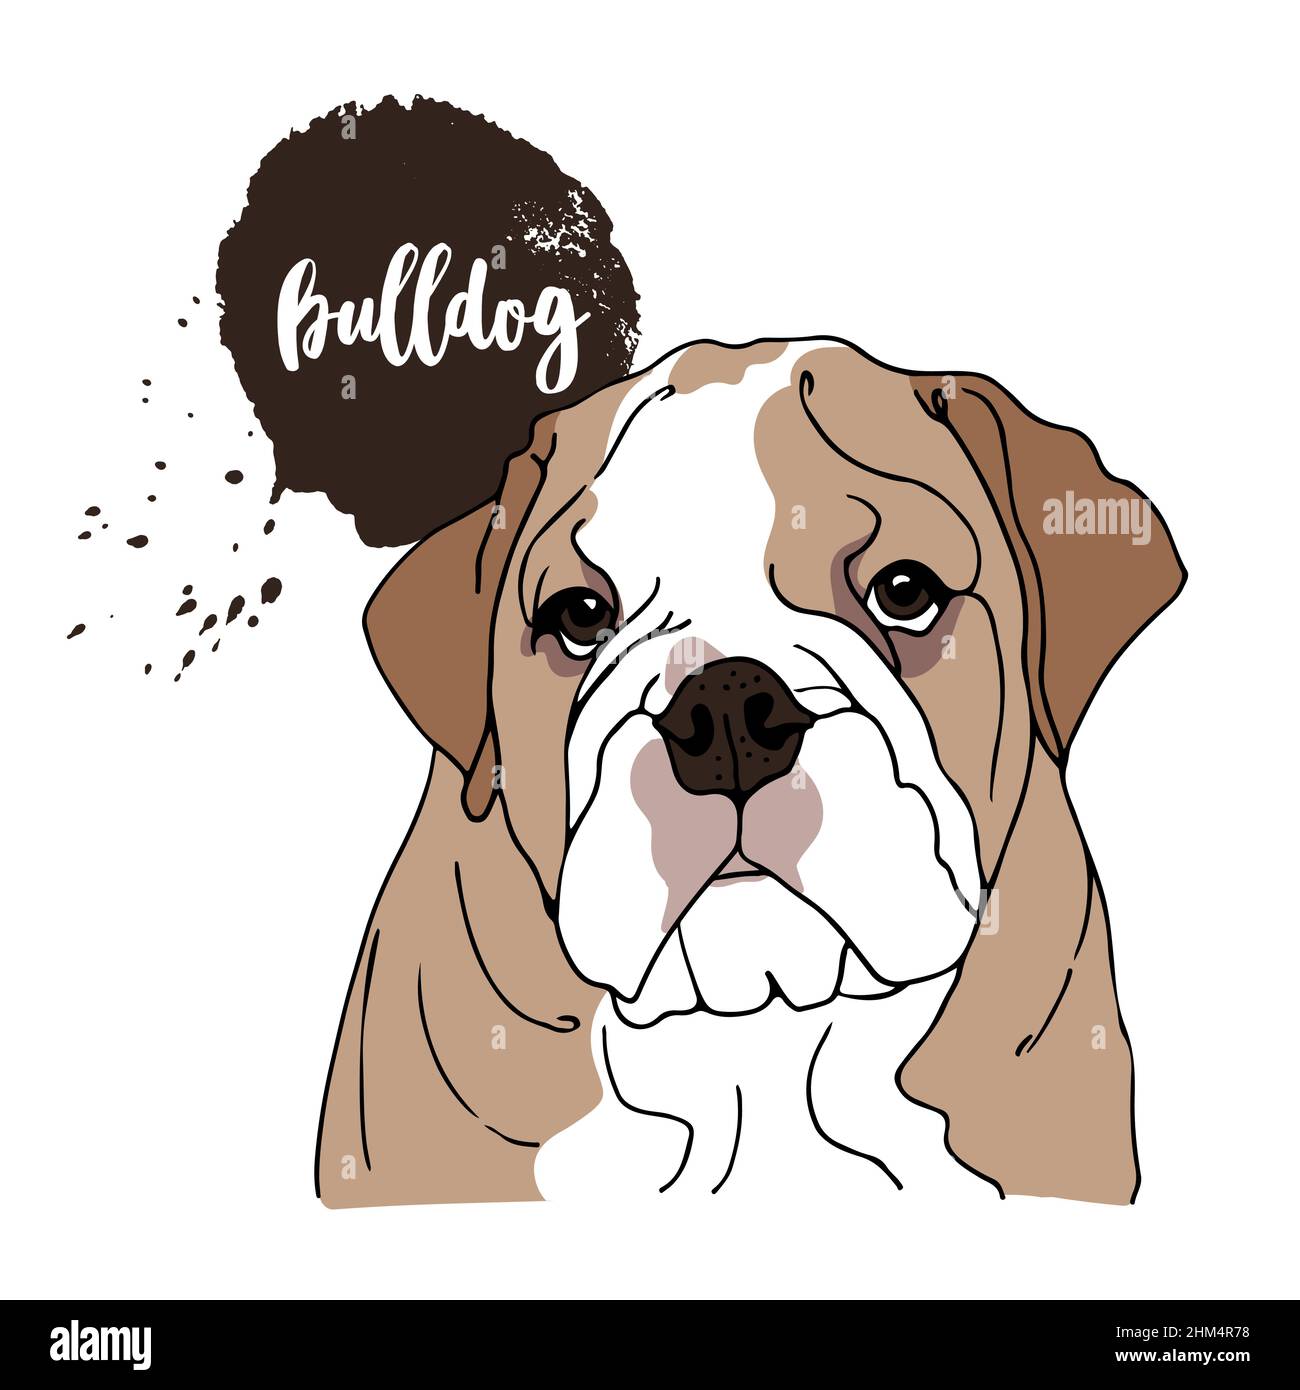 English Bulldog vector illustration, hand drawn sketch of a dog isolated on a white background Stock Vector